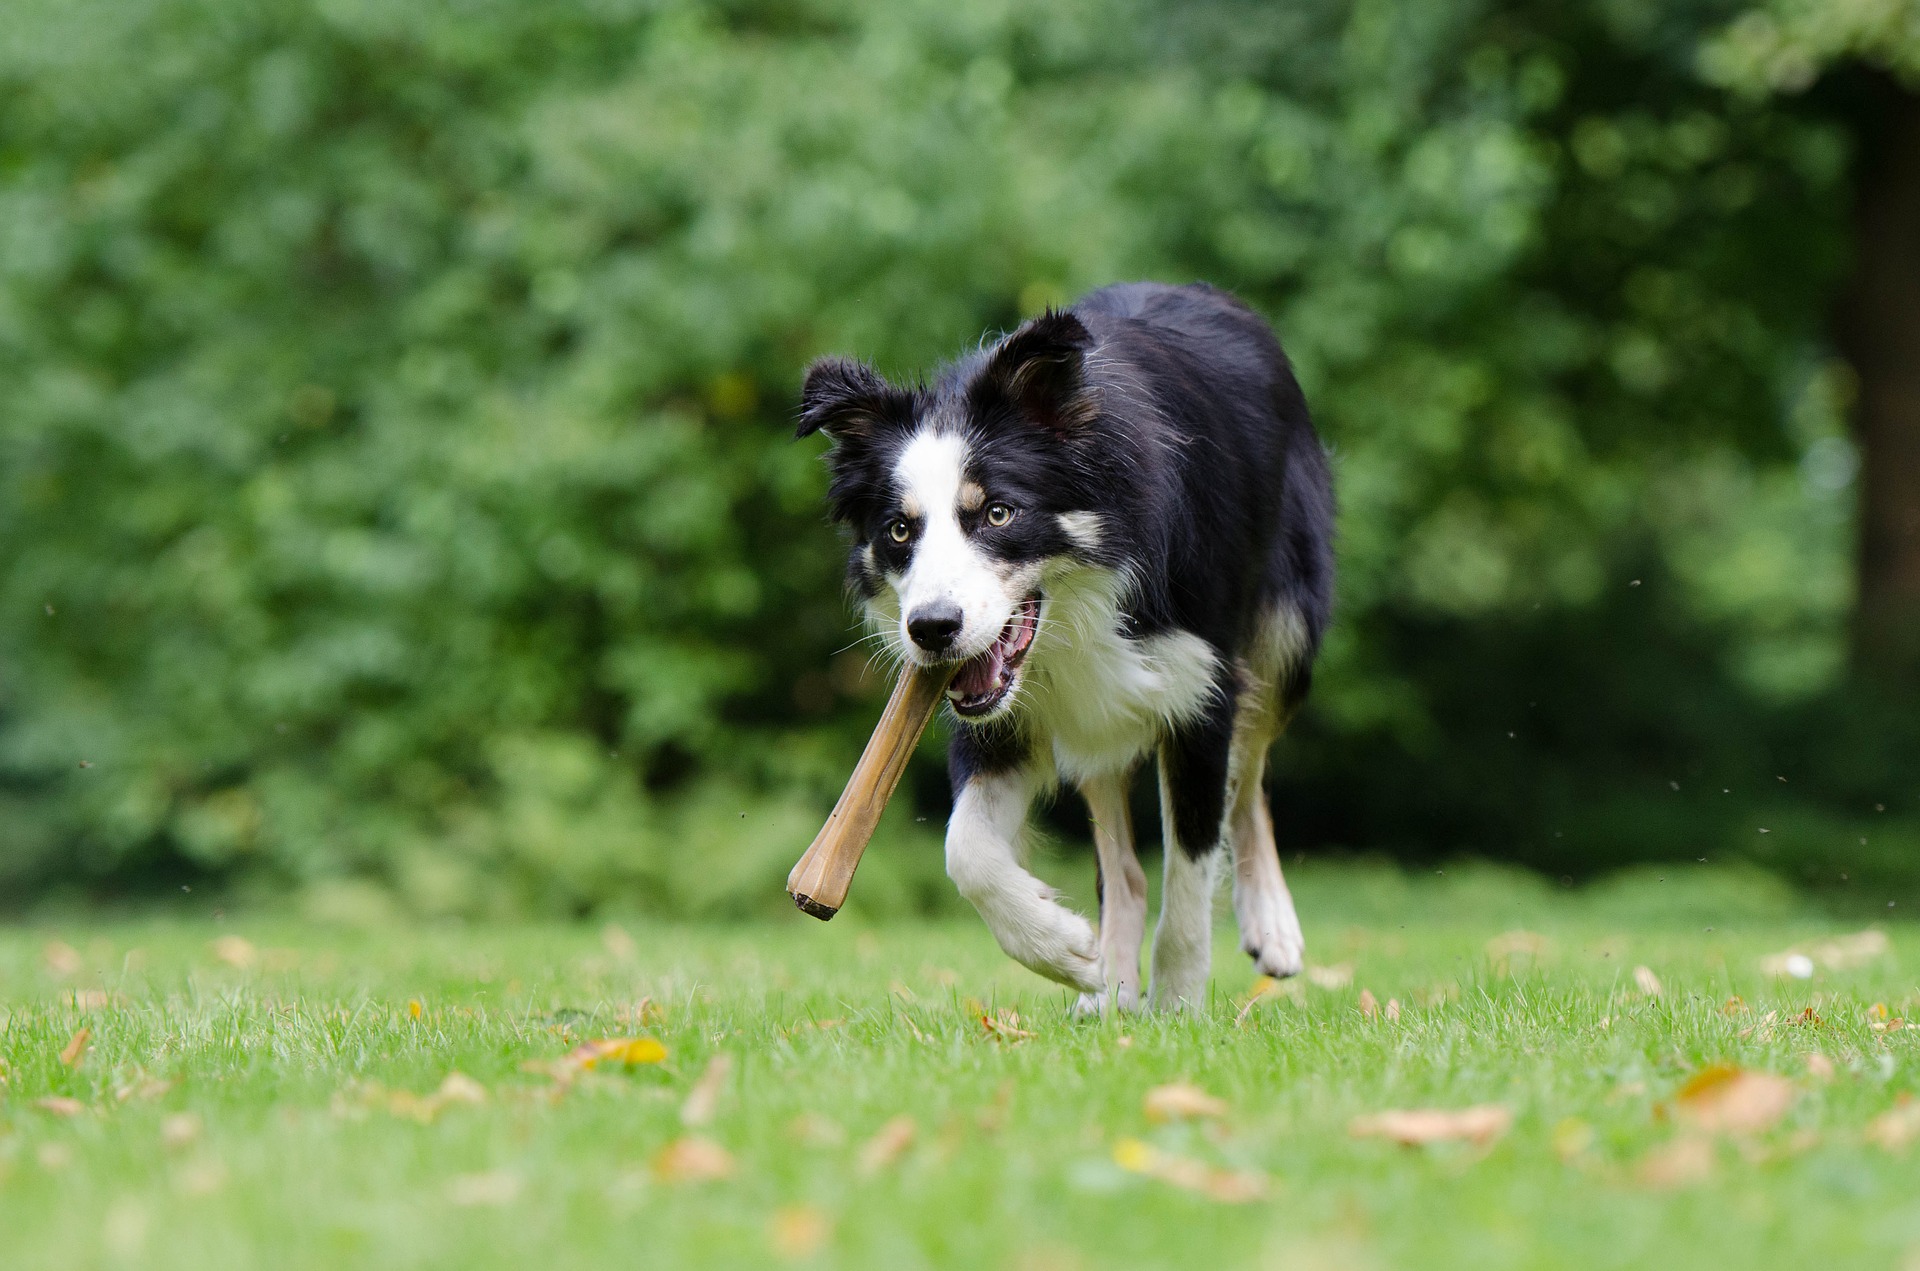 Chew on This, Not That: How to Choose the Safest Chew Toys for Your Dog